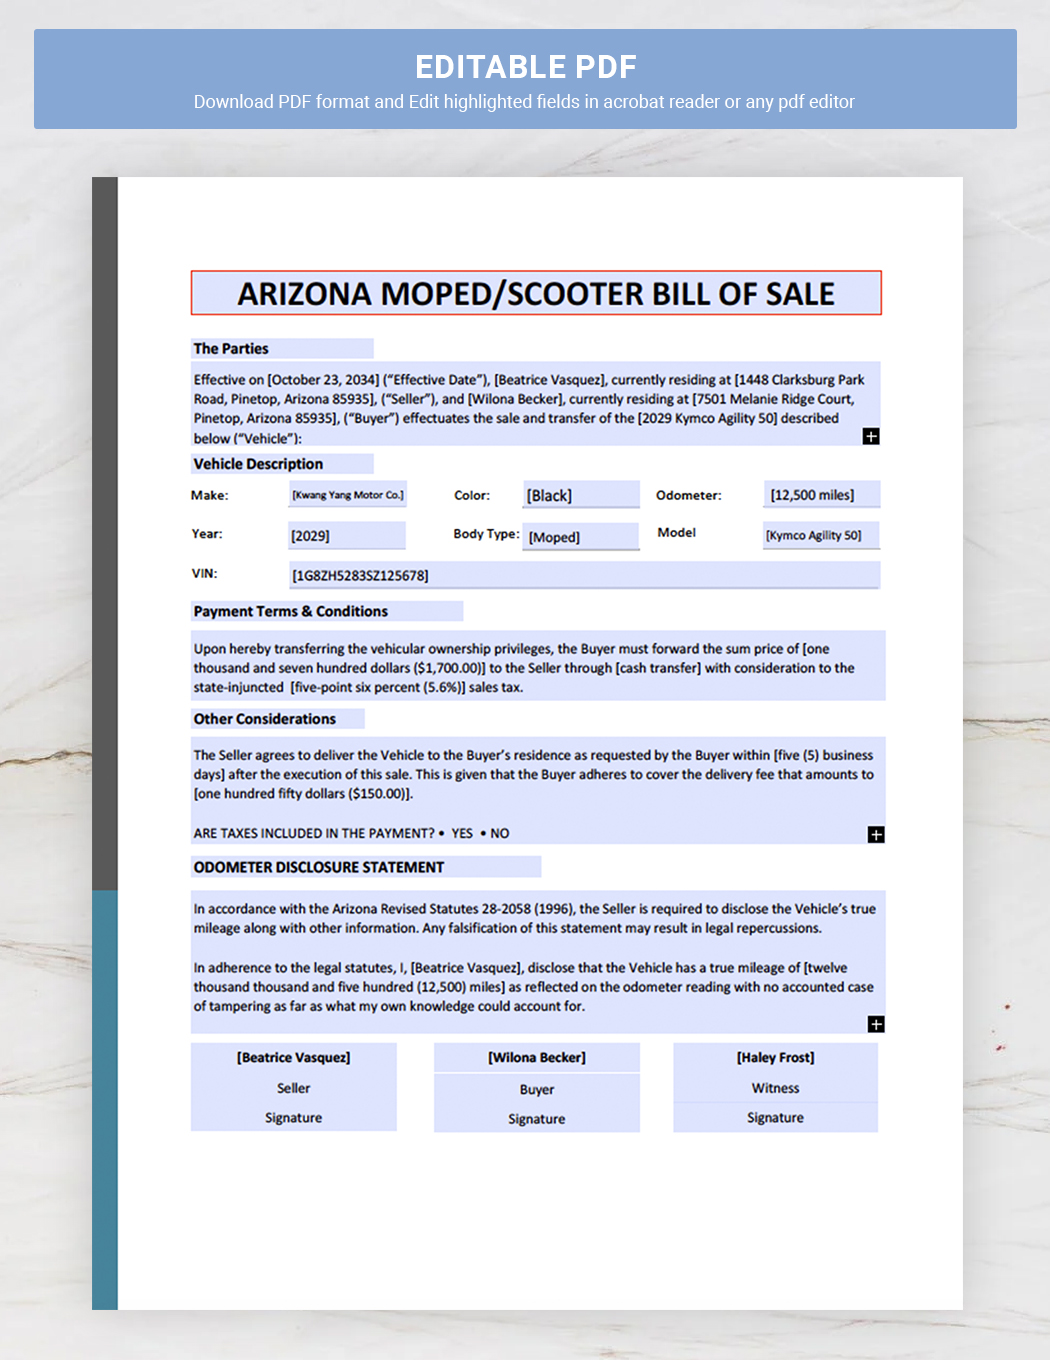 Arizona Moped / Scooter Bill of Sale Template